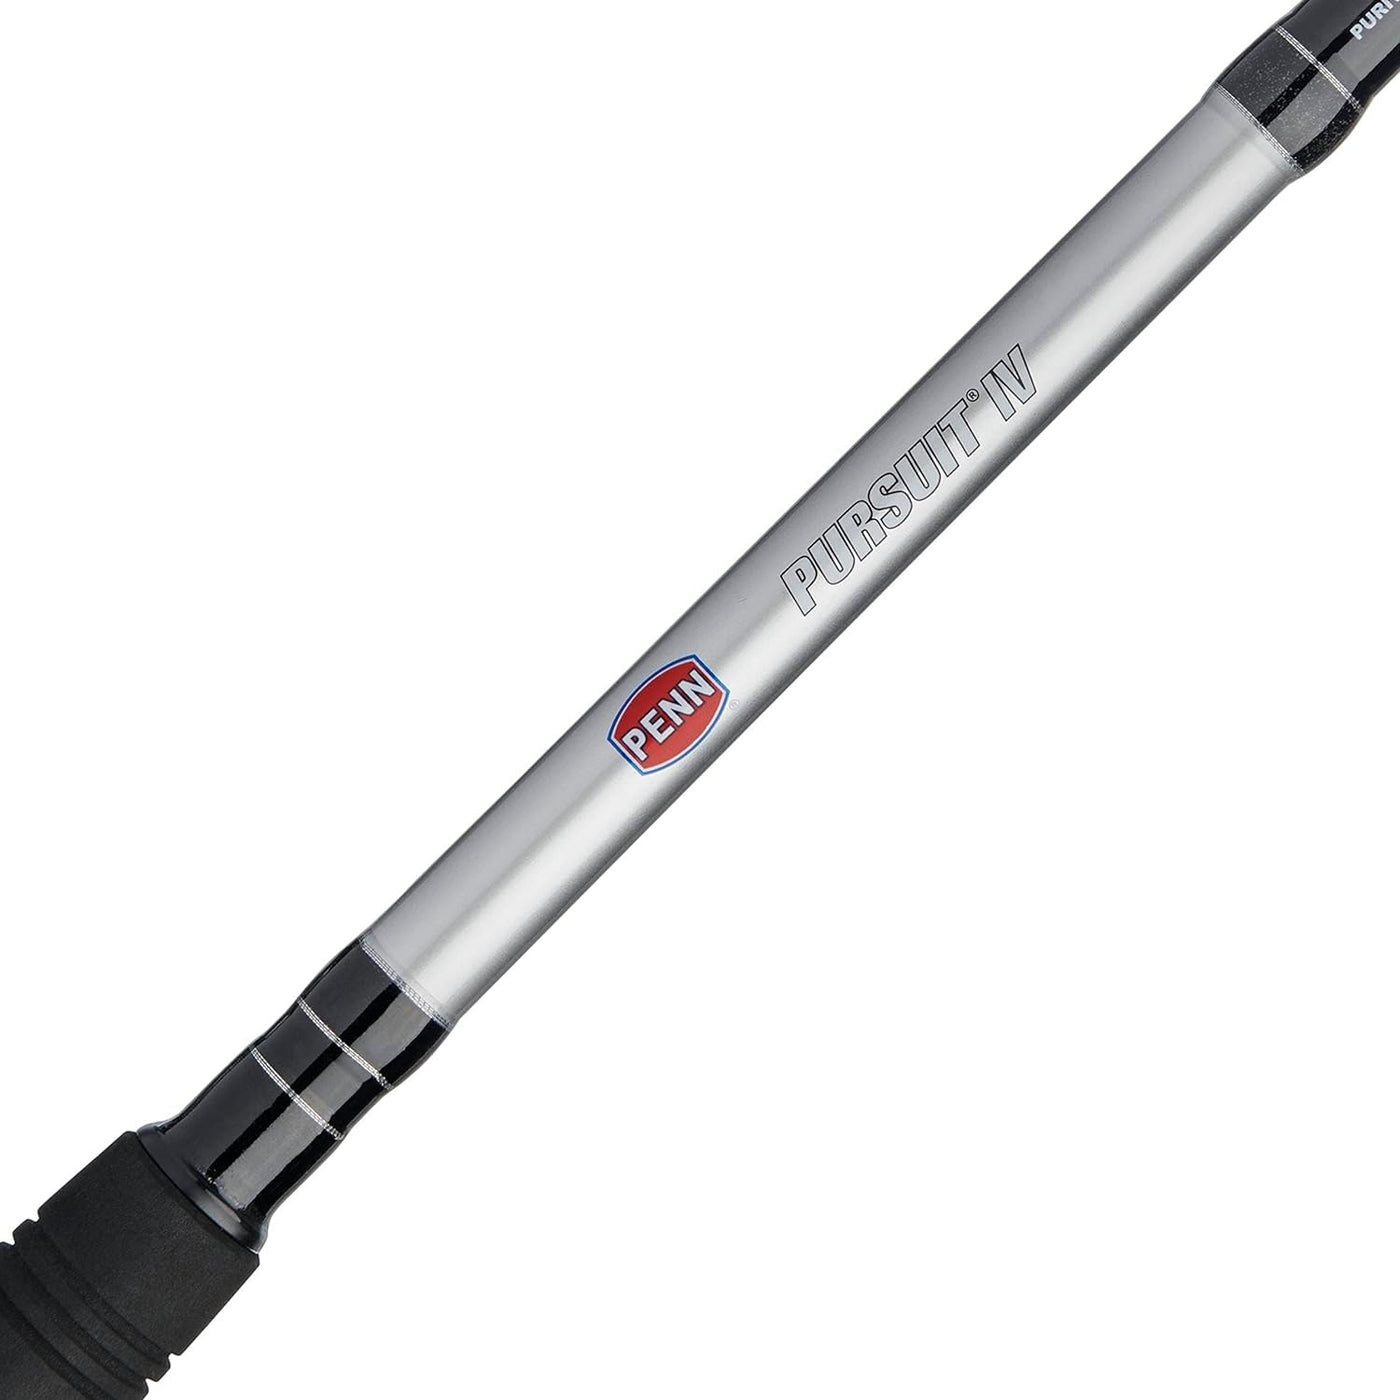 Detailed view of the PENN Pursuit IV one-piece fishing rod, highlighting its sleek, elongated design and the smooth, uniform texture of the rod's surface.